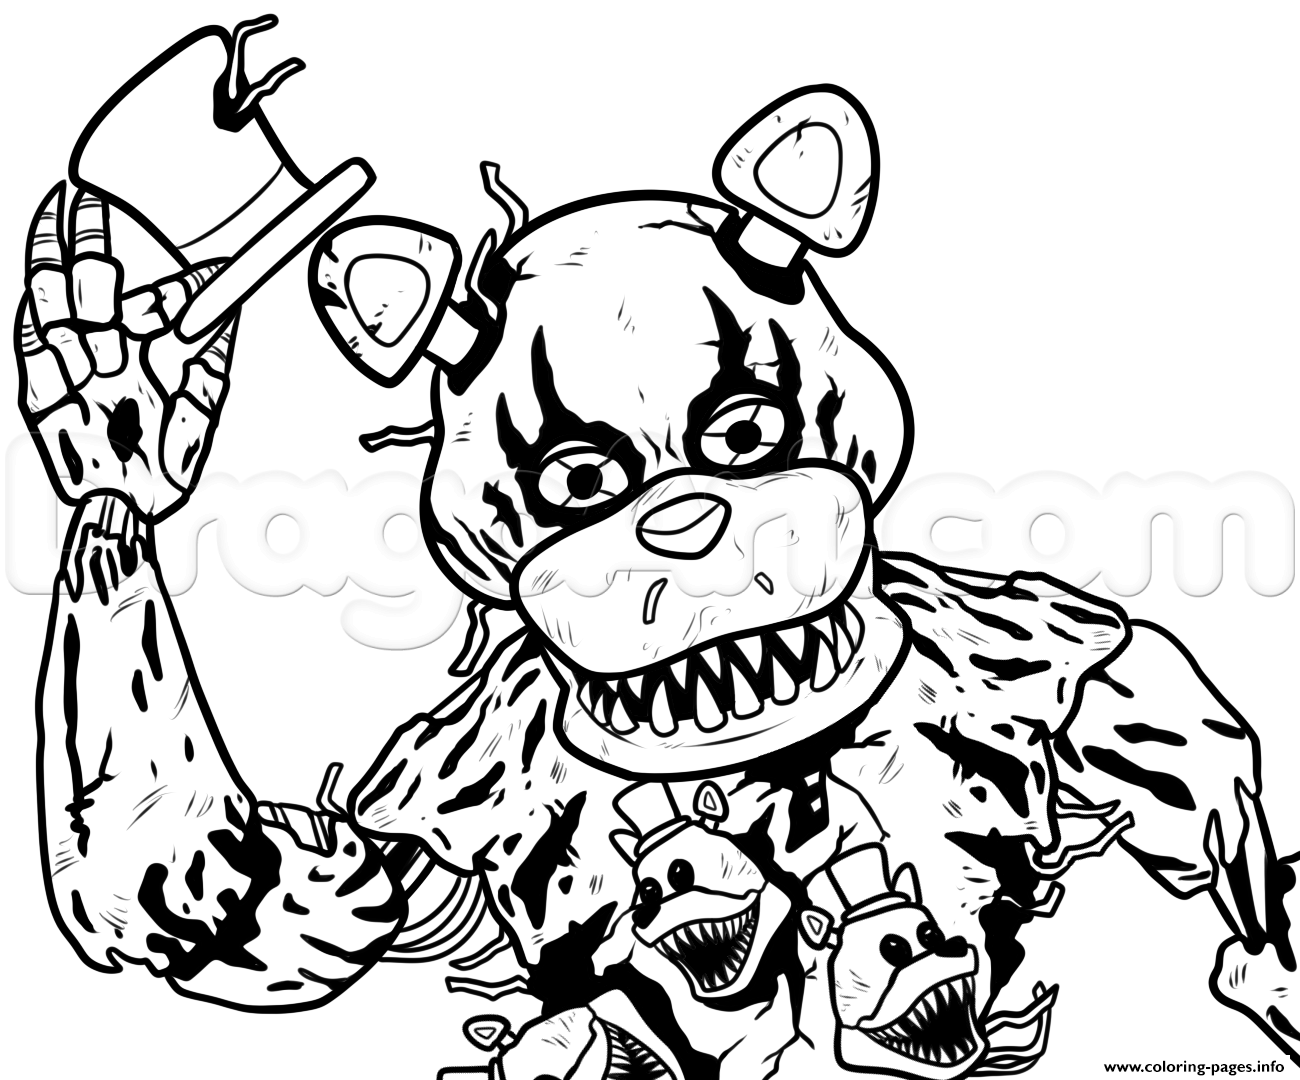 draw-nightmare-freddy-fazbear-five-nights-at-freddys-fnaf-coloring-pages-printable